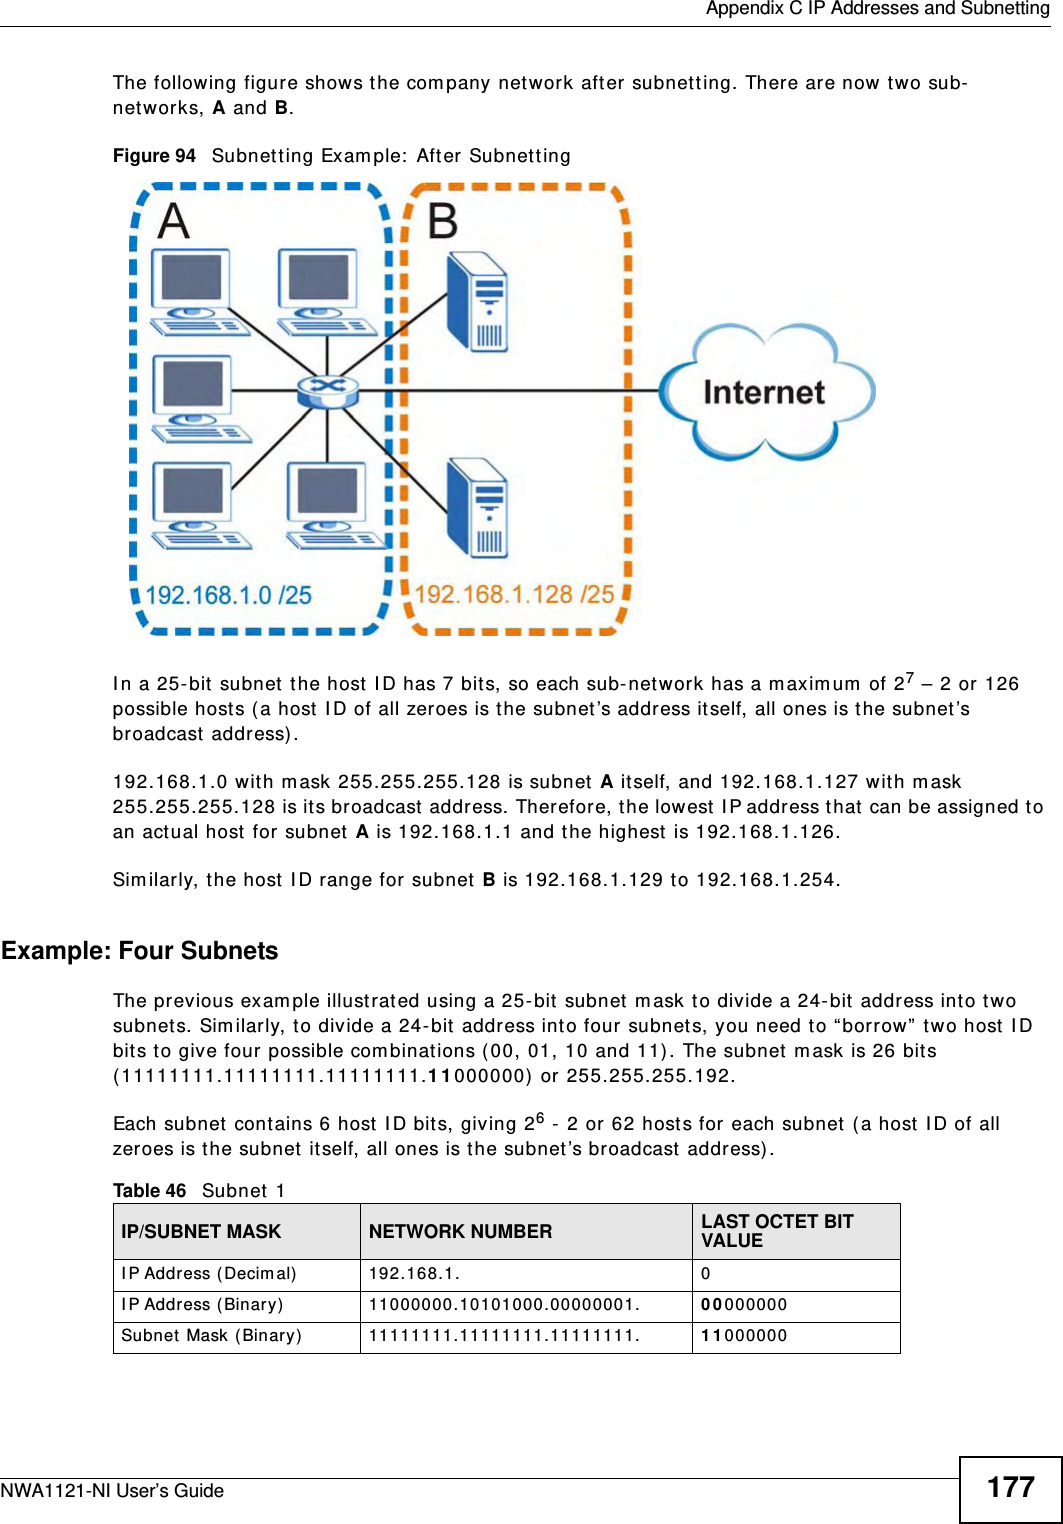  Appendix C IP Addresses and SubnettingNWA1121-NI User’s Guide 177The following figure shows the company network after subnetting. There are now two sub-networks, A and B. Figure 94   Subnetting Example: After SubnettingIn a 25-bit subnet the host ID has 7 bits, so each sub-network has a maximum of 27 – 2 or 126 possible hosts (a host ID of all zeroes is the subnet’s address itself, all ones is the subnet’s broadcast address).192.168.1.0 with mask 255.255.255.128 is subnet A itself, and 192.168.1.127 with mask 255.255.255.128 is its broadcast address. Therefore, the lowest IP address that can be assigned to an actual host for subnet A is 192.168.1.1 and the highest is 192.168.1.126. Similarly, the host ID range for subnet B is 192.168.1.129 to 192.168.1.254.Example: Four Subnets The previous example illustrated using a 25-bit subnet mask to divide a 24-bit address into two subnets. Similarly, to divide a 24-bit address into four subnets, you need to “borrow” two host ID bits to give four possible combinations (00, 01, 10 and 11). The subnet mask is 26 bits (11111111.11111111.11111111.11000000) or 255.255.255.192. Each subnet contains 6 host ID bits, giving 26 - 2 or 62 hosts for each subnet (a host ID of all zeroes is the subnet itself, all ones is the subnet’s broadcast address). Table 46   Subnet 1IP/SUBNET MASK NETWORK NUMBER LAST OCTET BIT VALUEIP Address (Decimal) 192.168.1. 0IP Address (Binary) 11000000.10101000.00000001. 00000000Subnet Mask (Binary) 11111111.11111111.11111111. 11000000